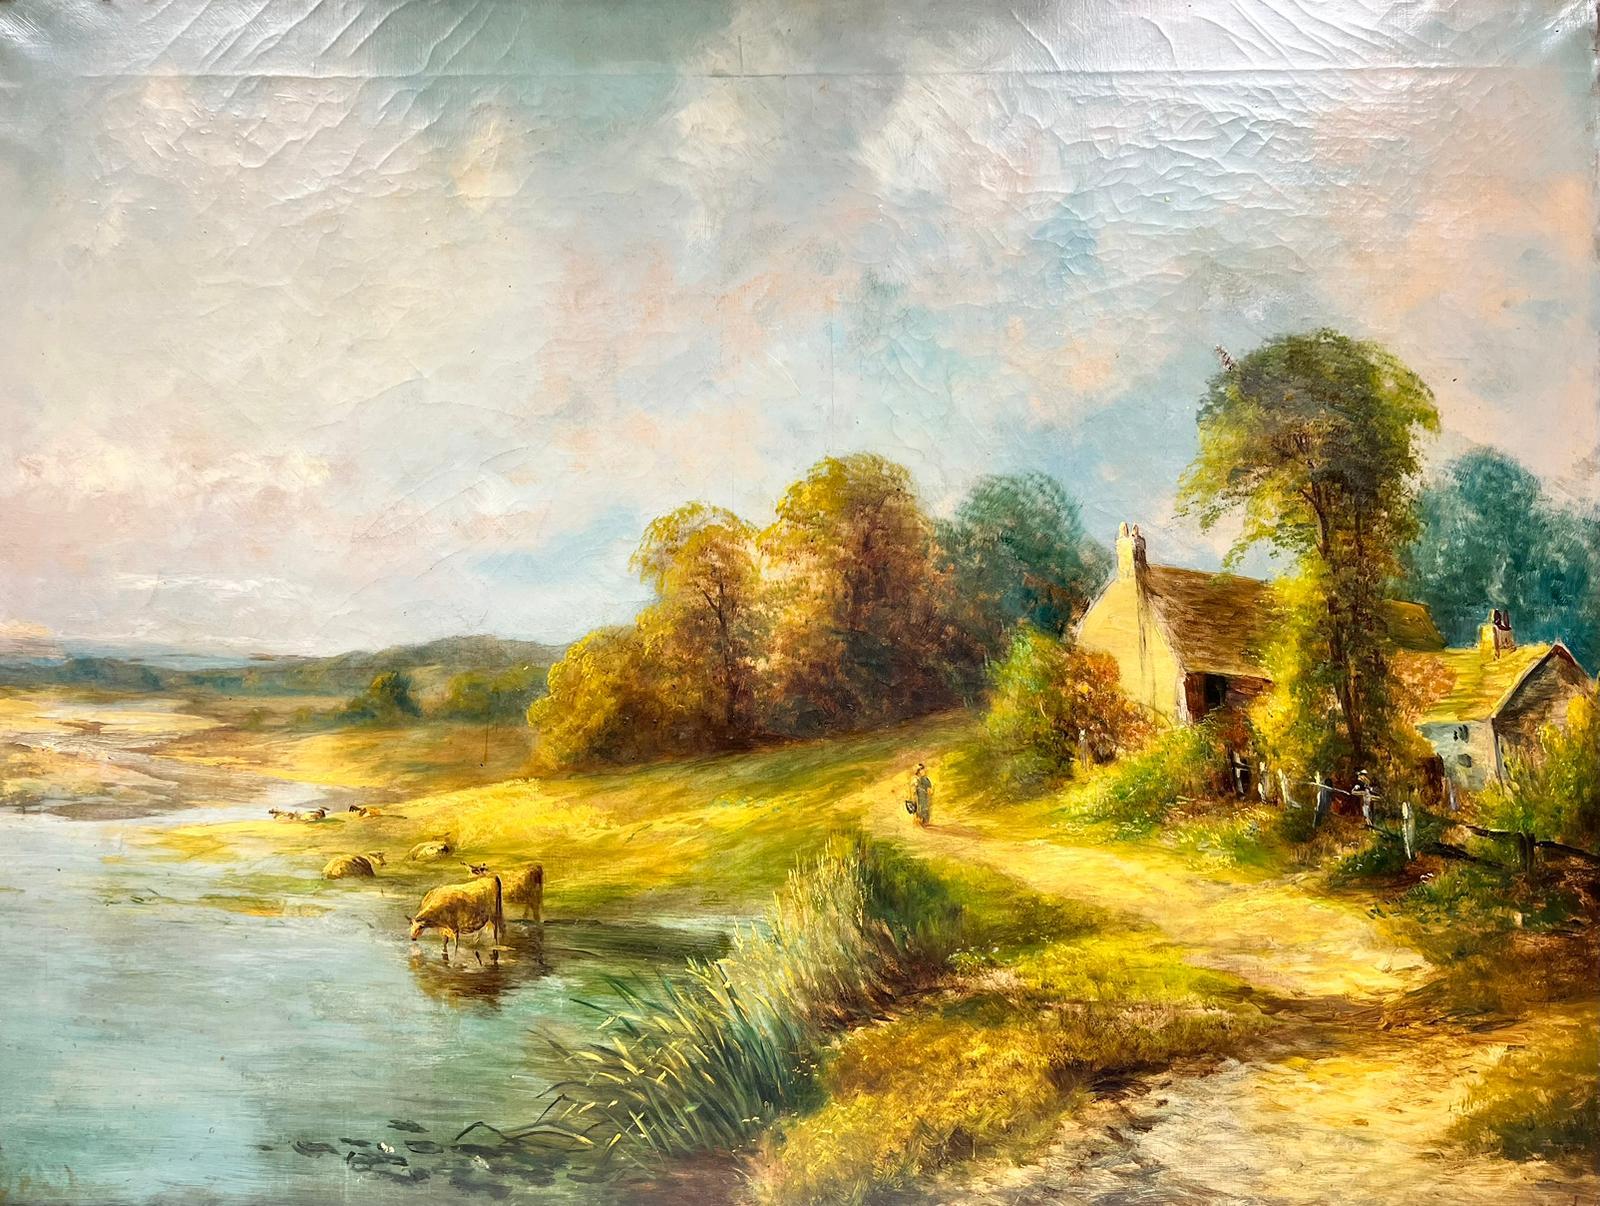 Tranquil Pastures
English School, 19th century 
oil painting on canvas, unframed
canvas: 30 x 40 inches
provenance: private collection, England 
condition: overall very good - small hole in canvas , shown in photo 